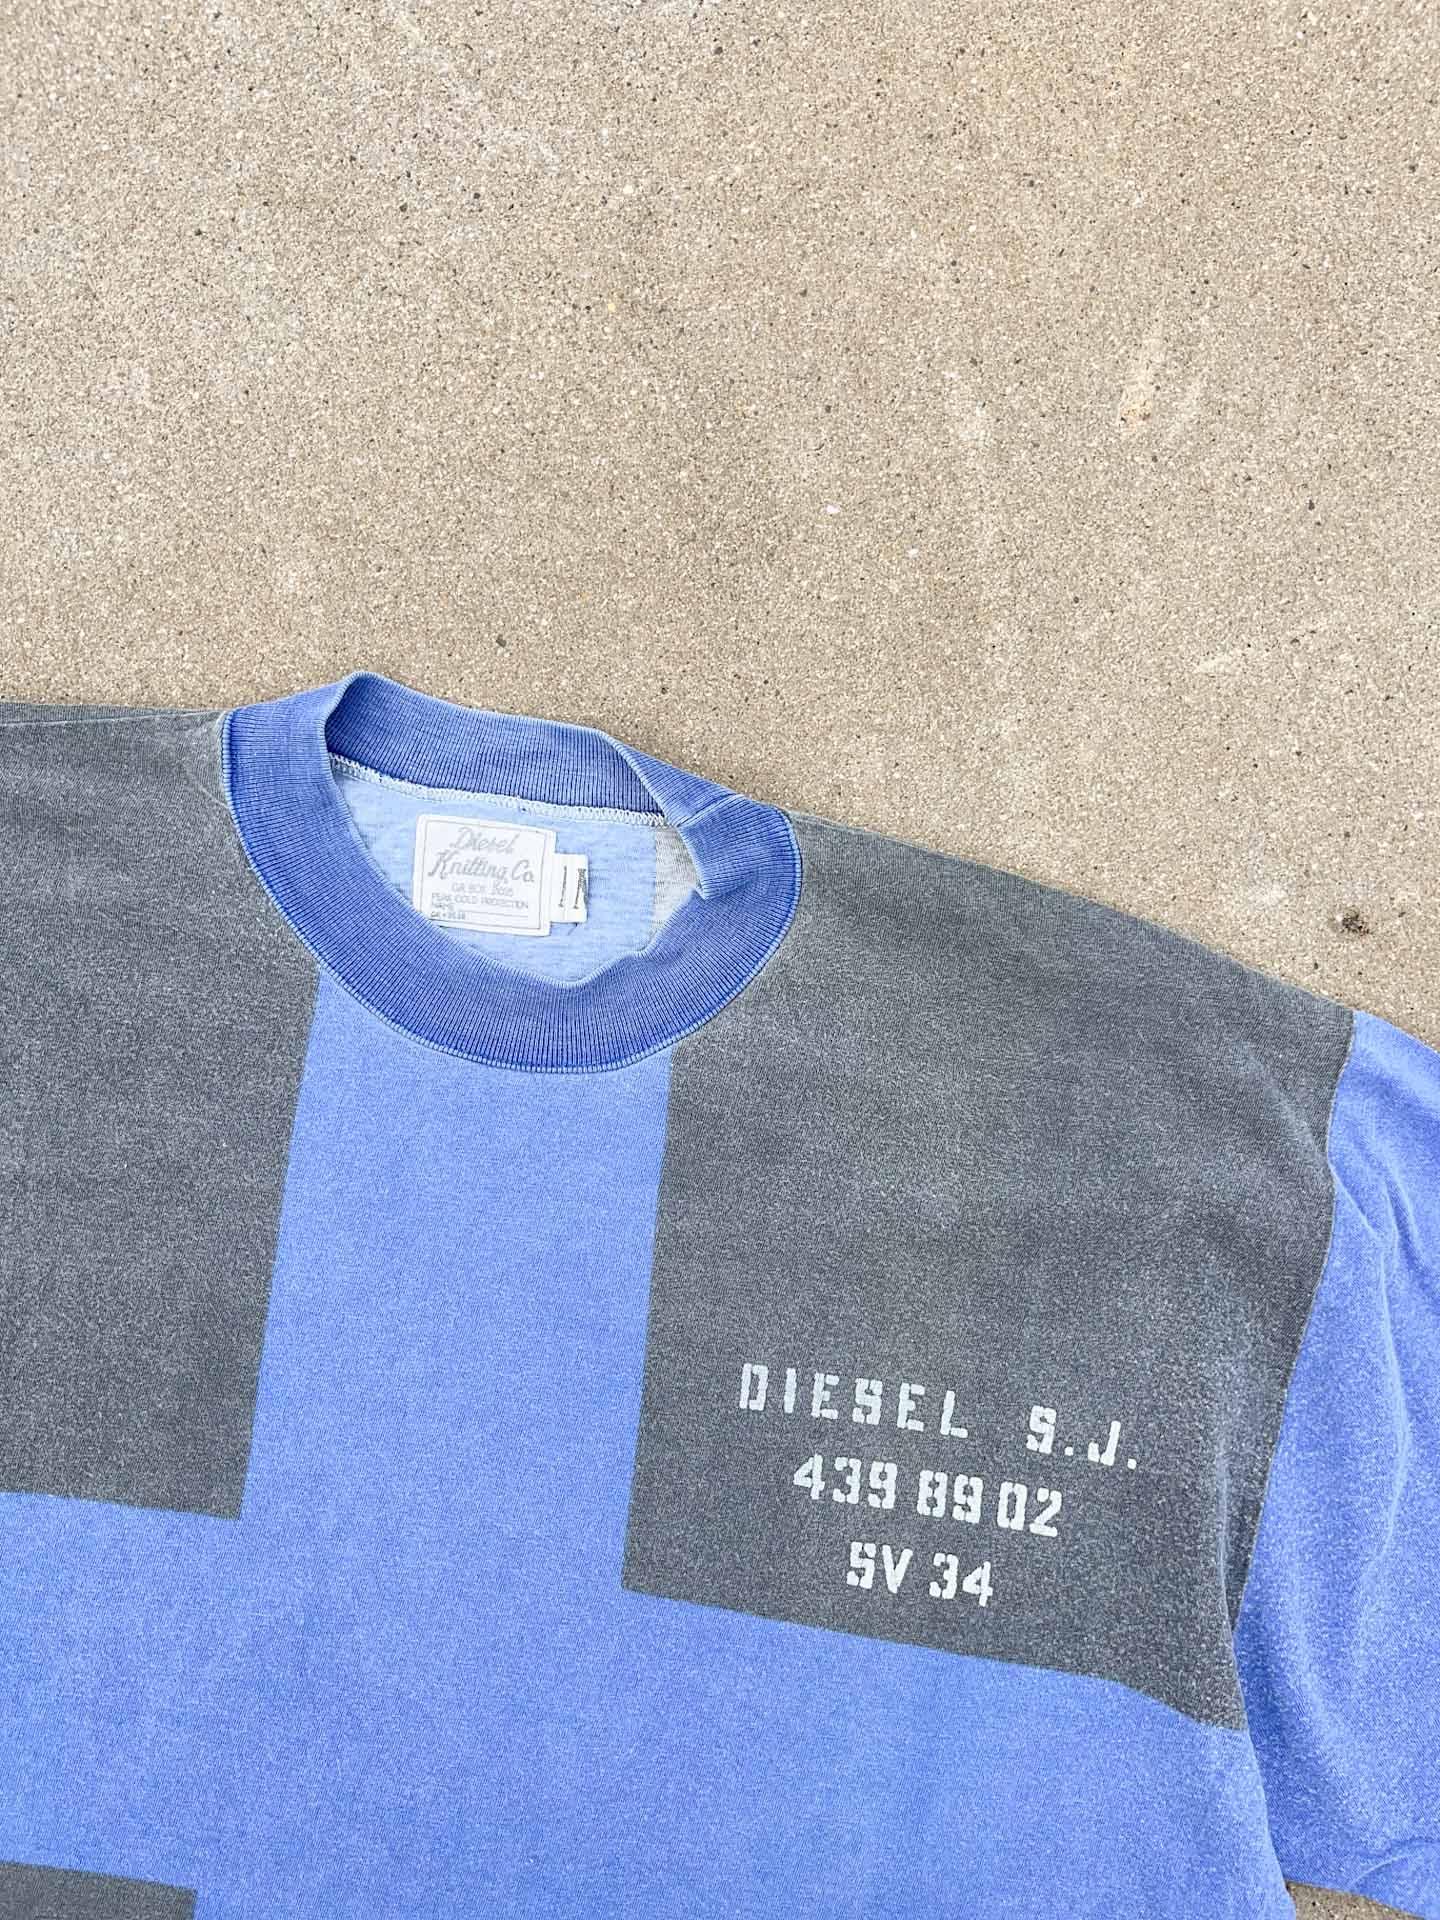 Diesel Knitting Company - secondvintage